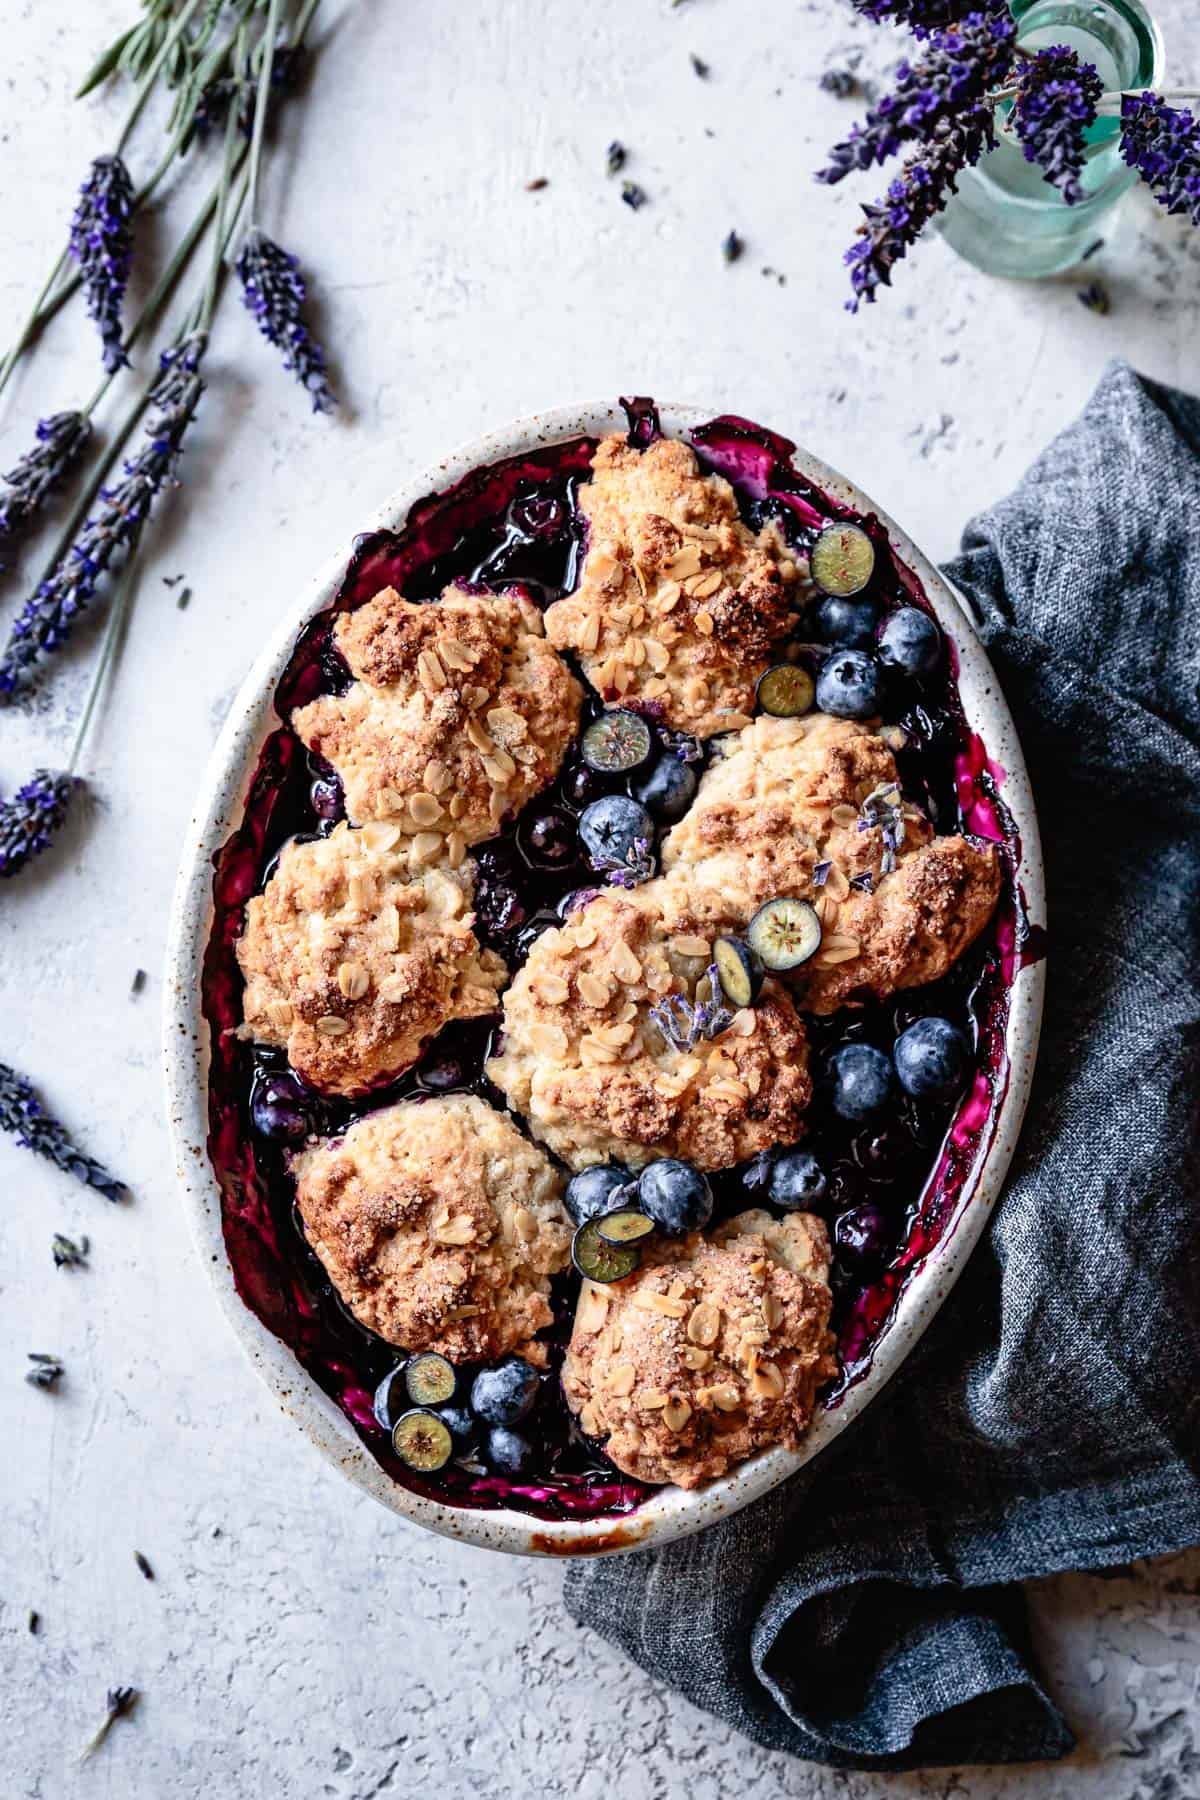 Easy Gluten-Free Blueberry Cobbler Recipe, baked in a dish